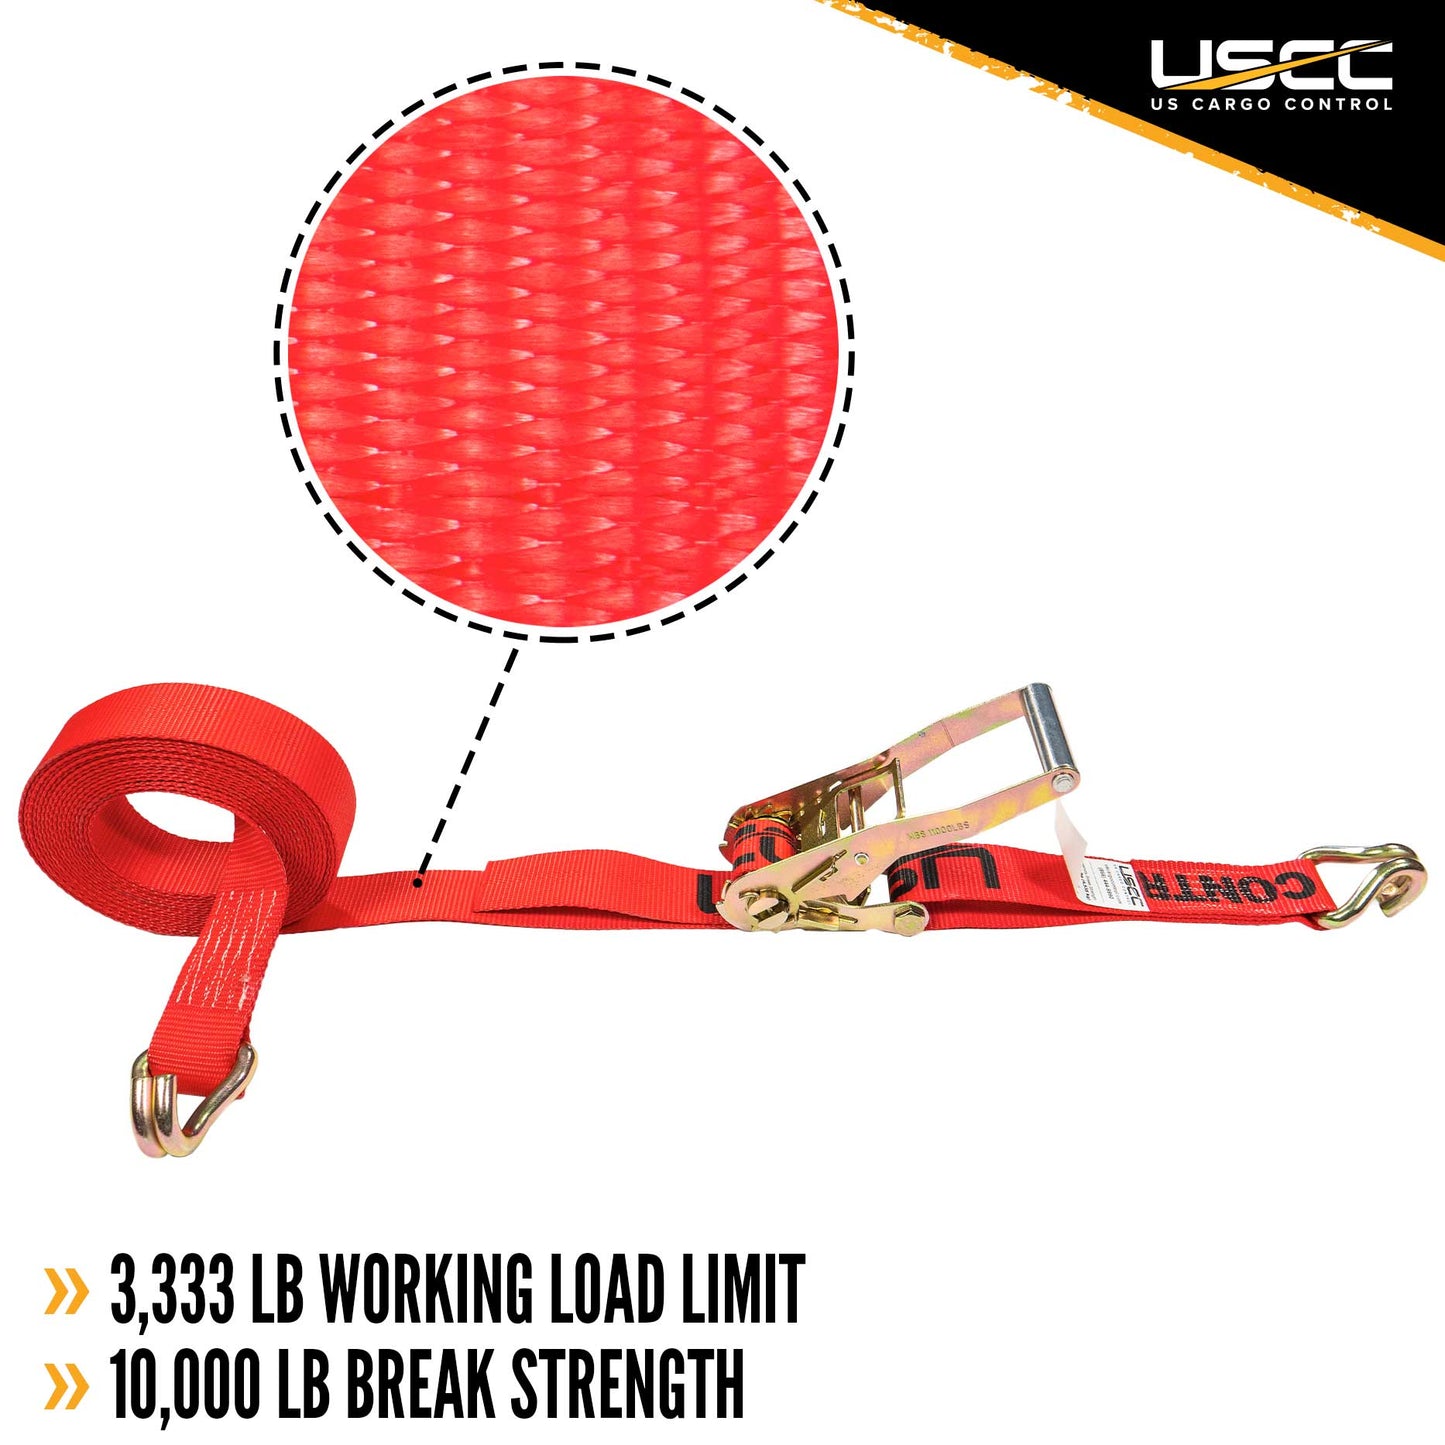 2" x 27' Red Ratchet Strap w/ Double J Hook